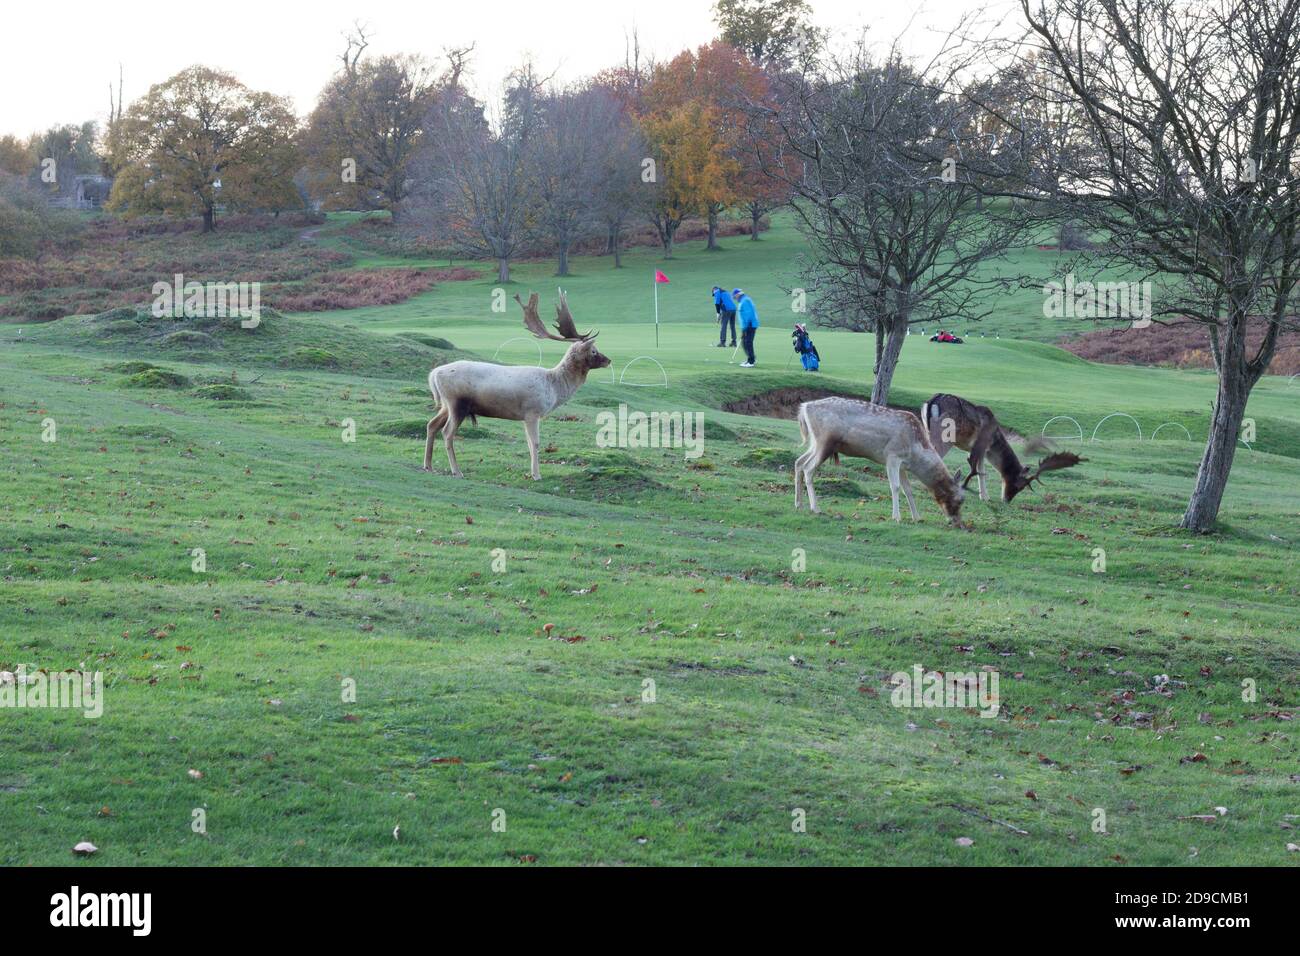 Deers (Cervidae) watched two golfers putting away in Golf course in Kent, England Stock Photo